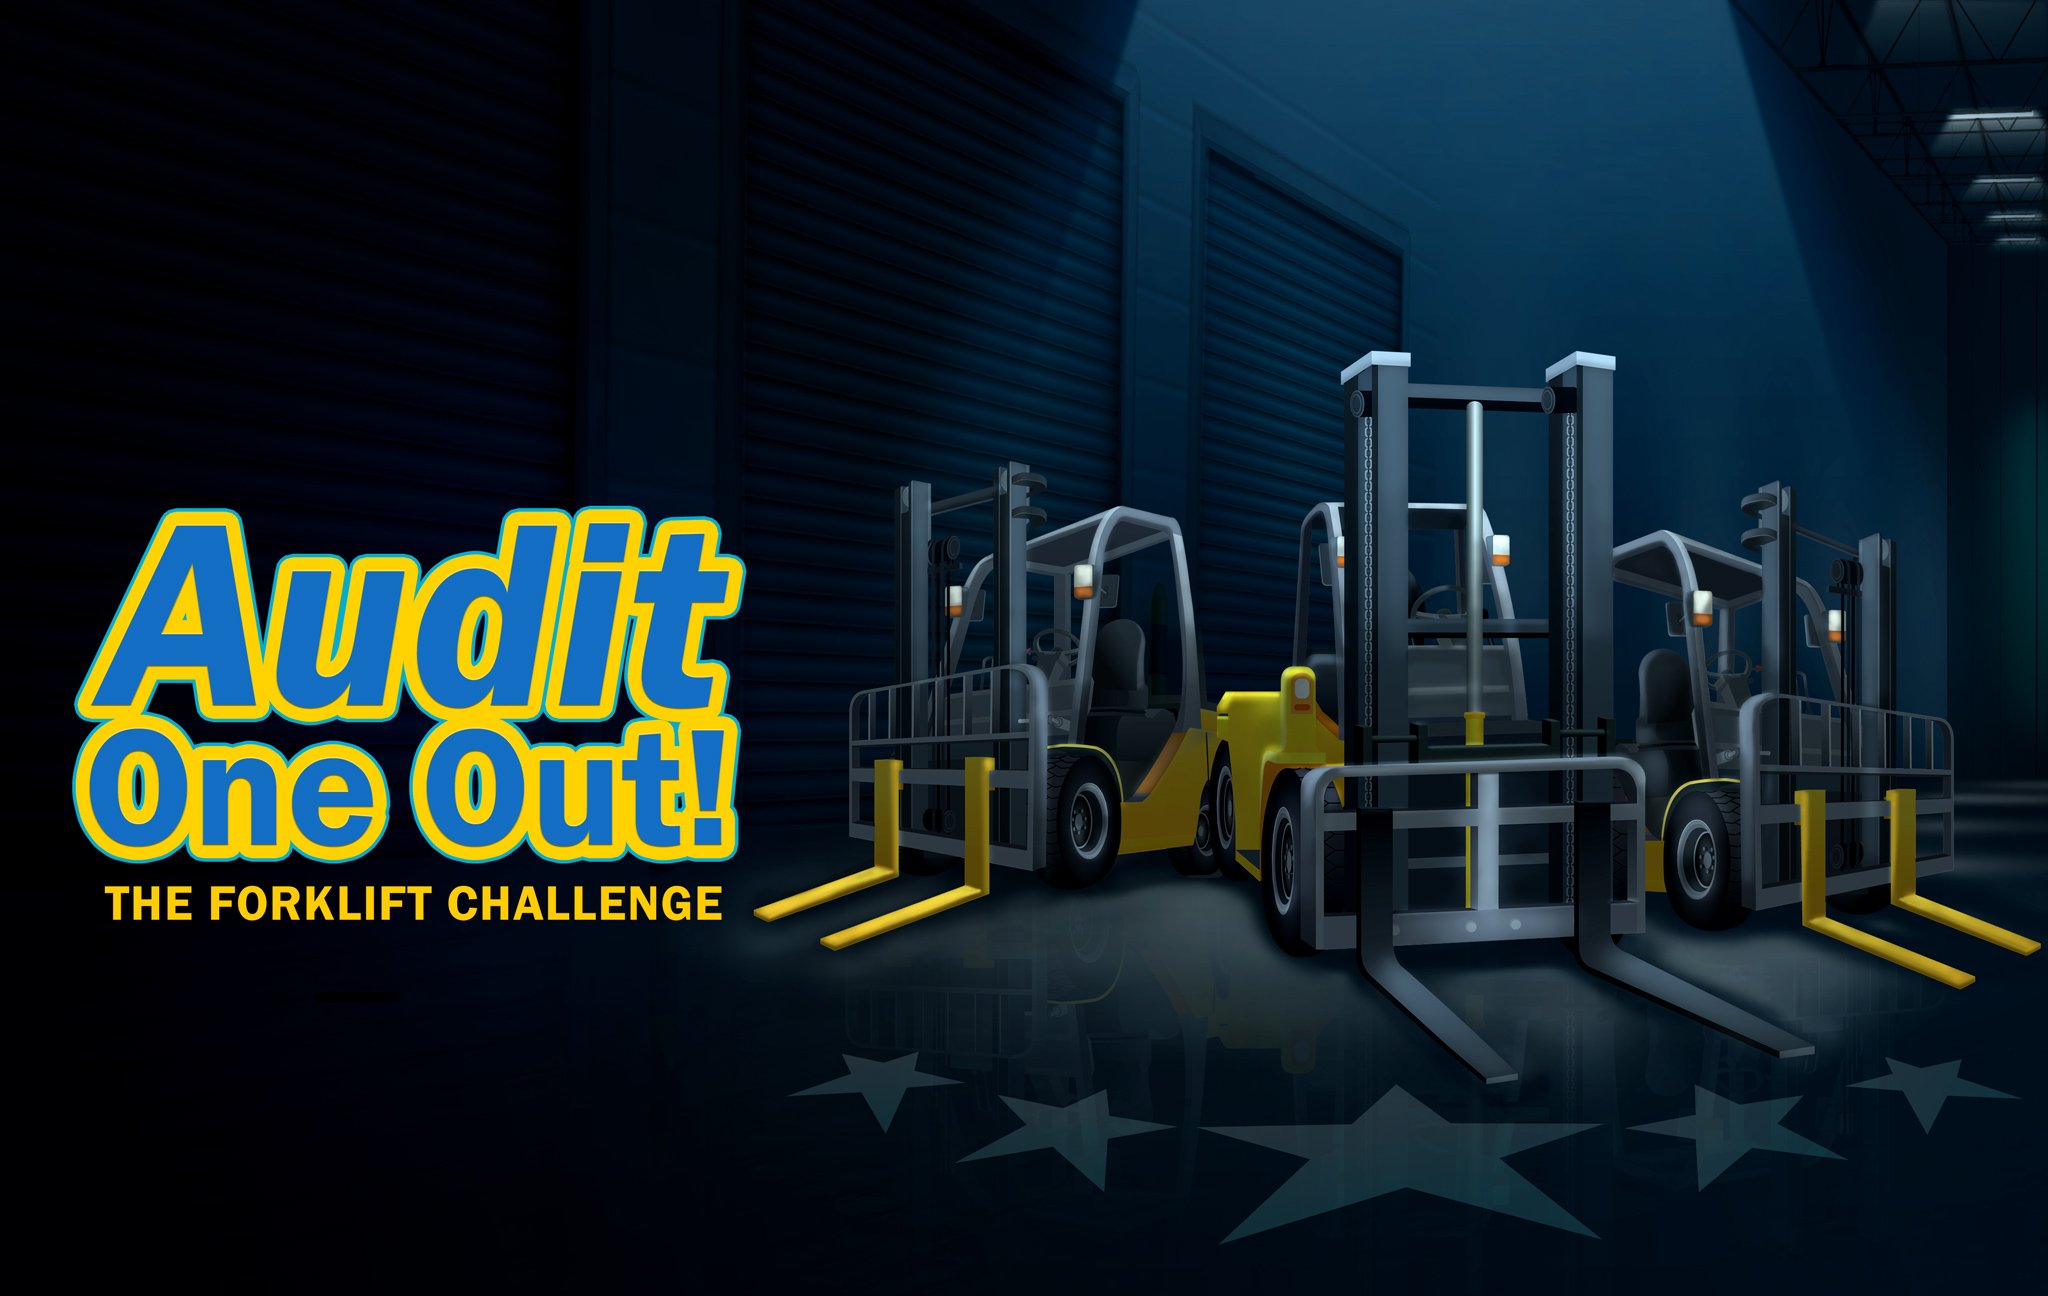 Audit One Out! The Forklift Challenge